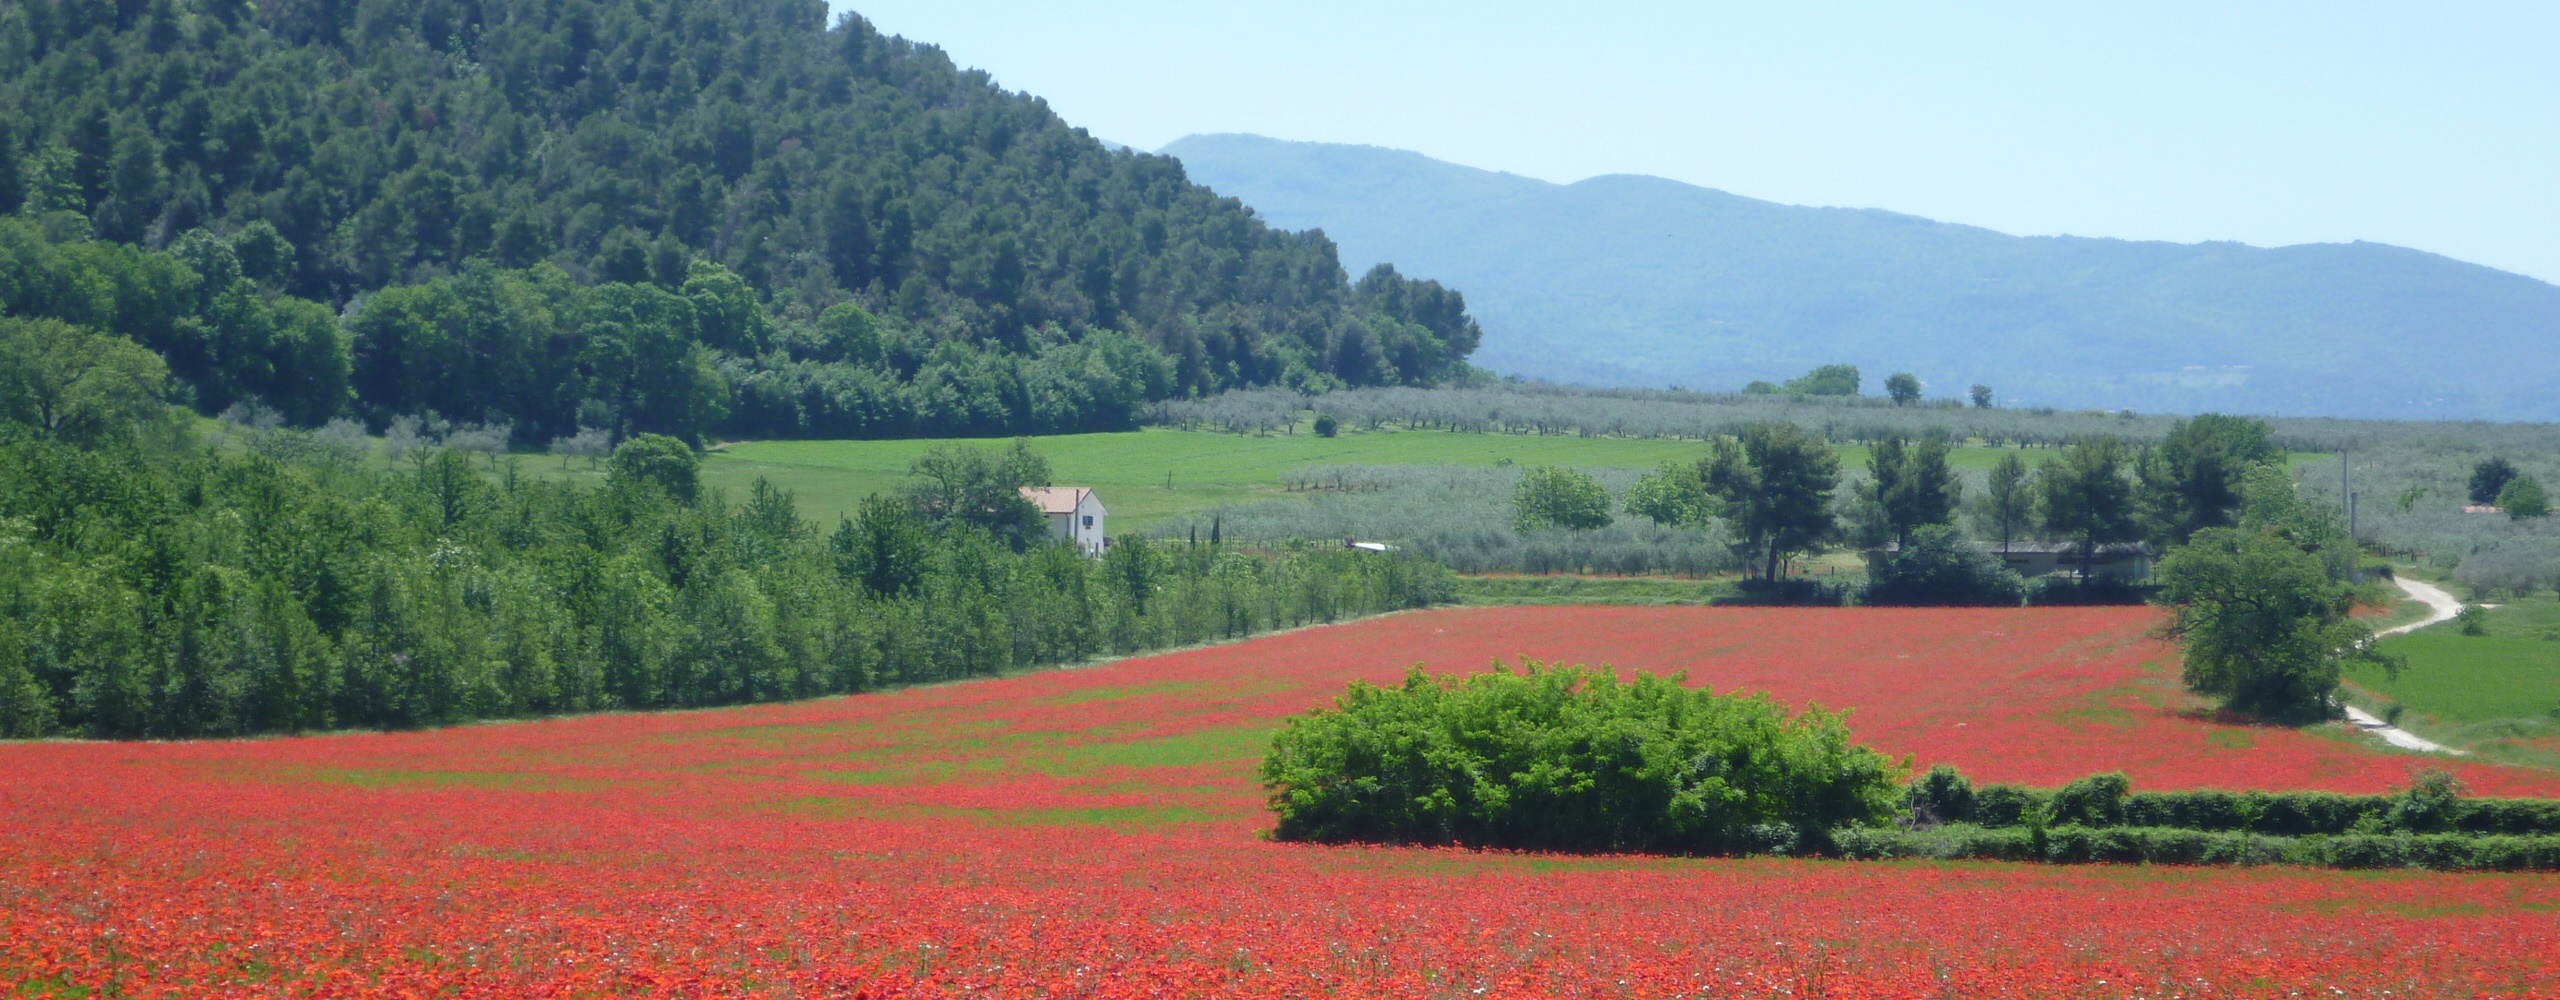 Umbrian landscape with poppies